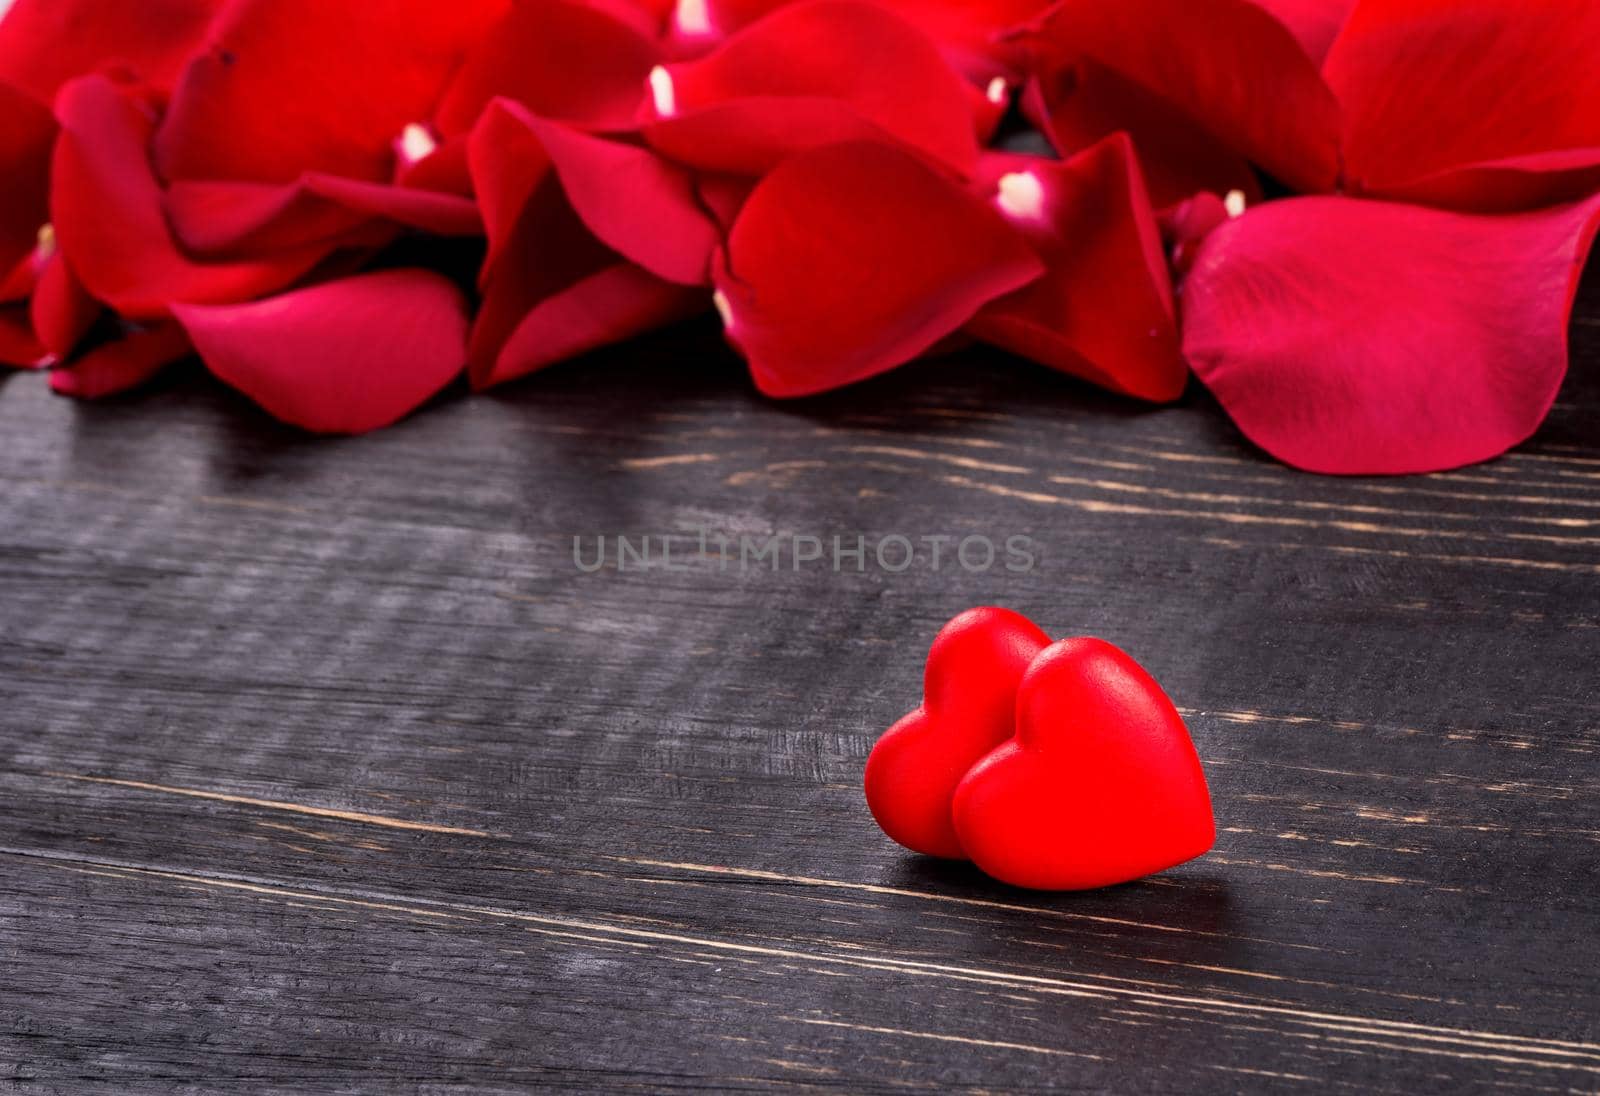 Two hearts on a wooden background with scattered red rose petals